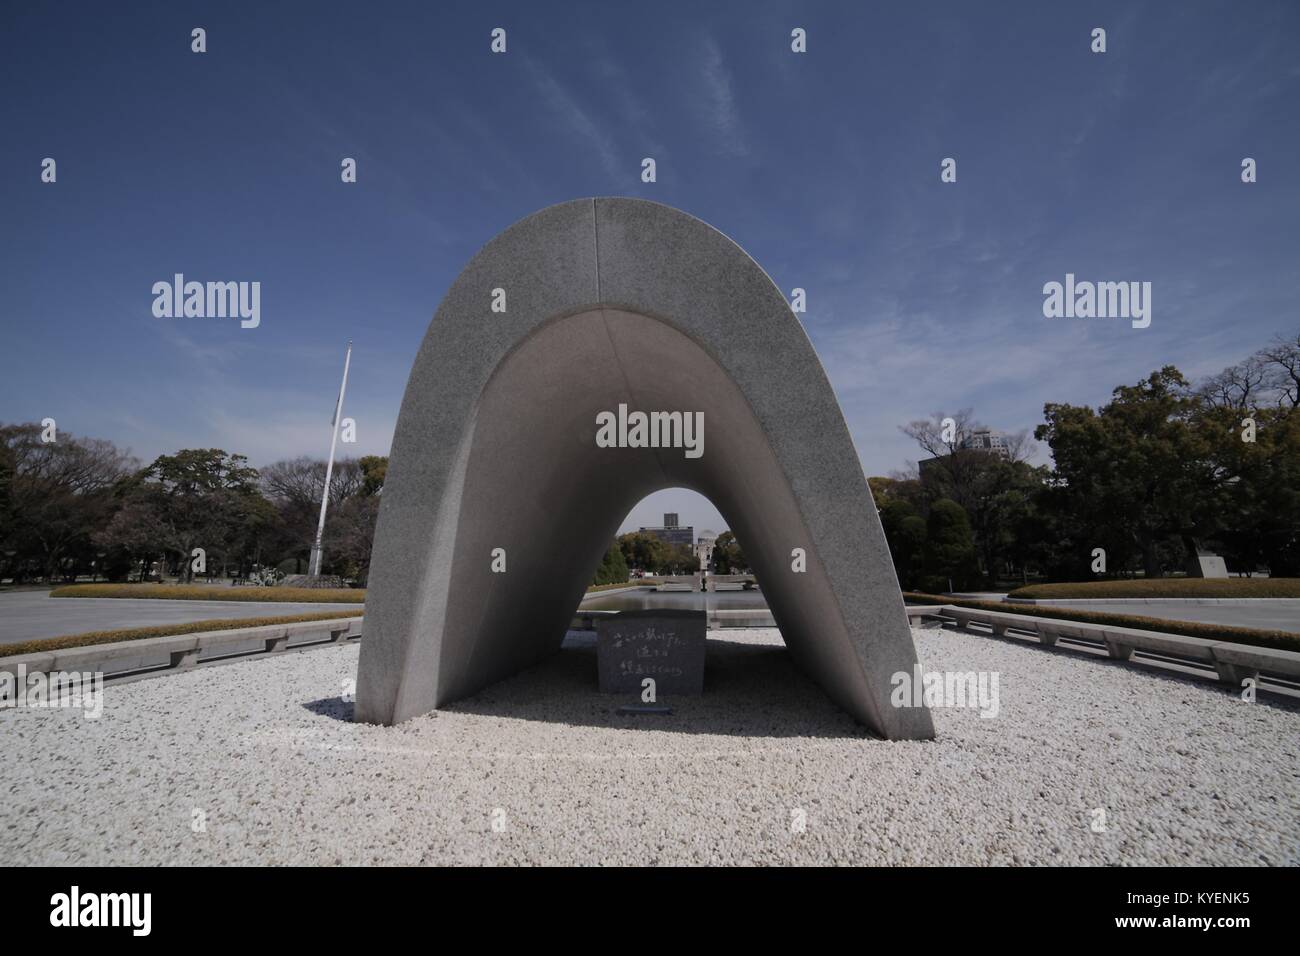 Cenotaph at the Hiroshima Peace Memorial, part of the Hiroshima Peace Memorial Park, commemorating those who died in the atomic bombing of the city, Hiroshima, Japan, March 12, 2014. () Stock Photo